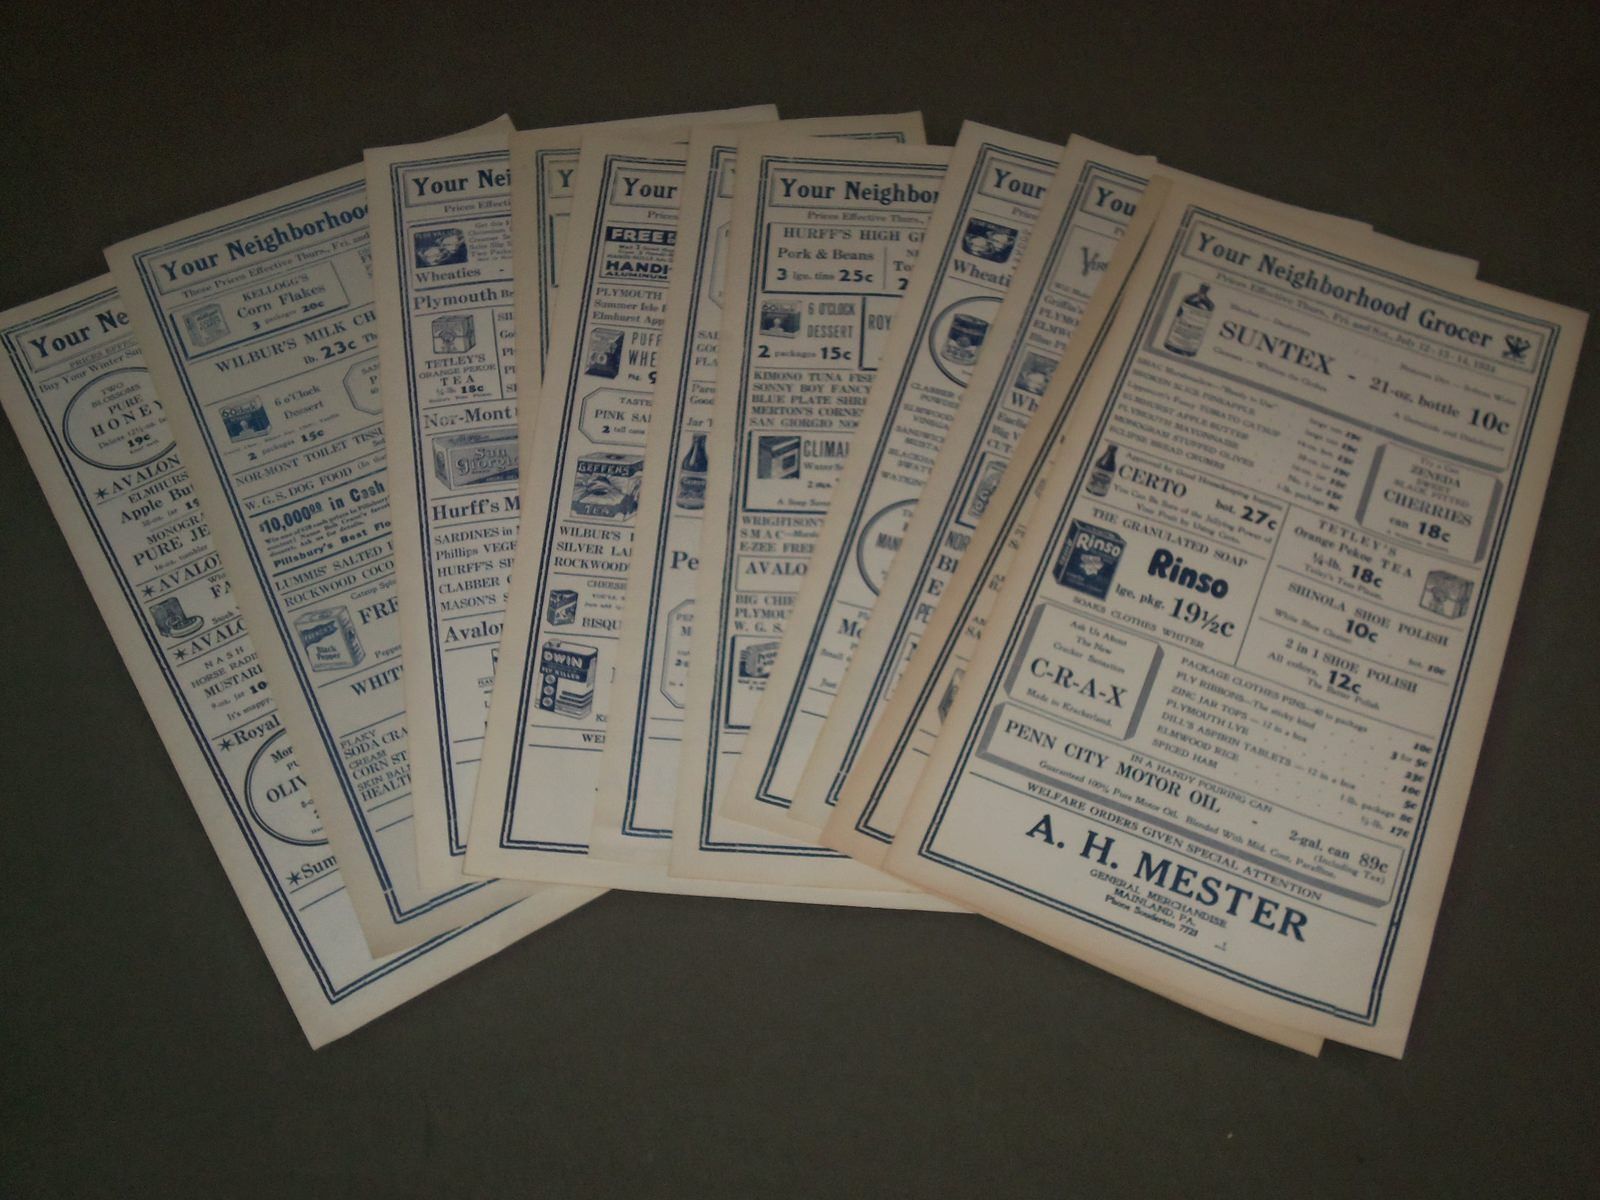 1934 A. H. MESTER GROCER WEEKLY WINDOW CARDS LOT OF 10 - MAINLAND PA - O 2262